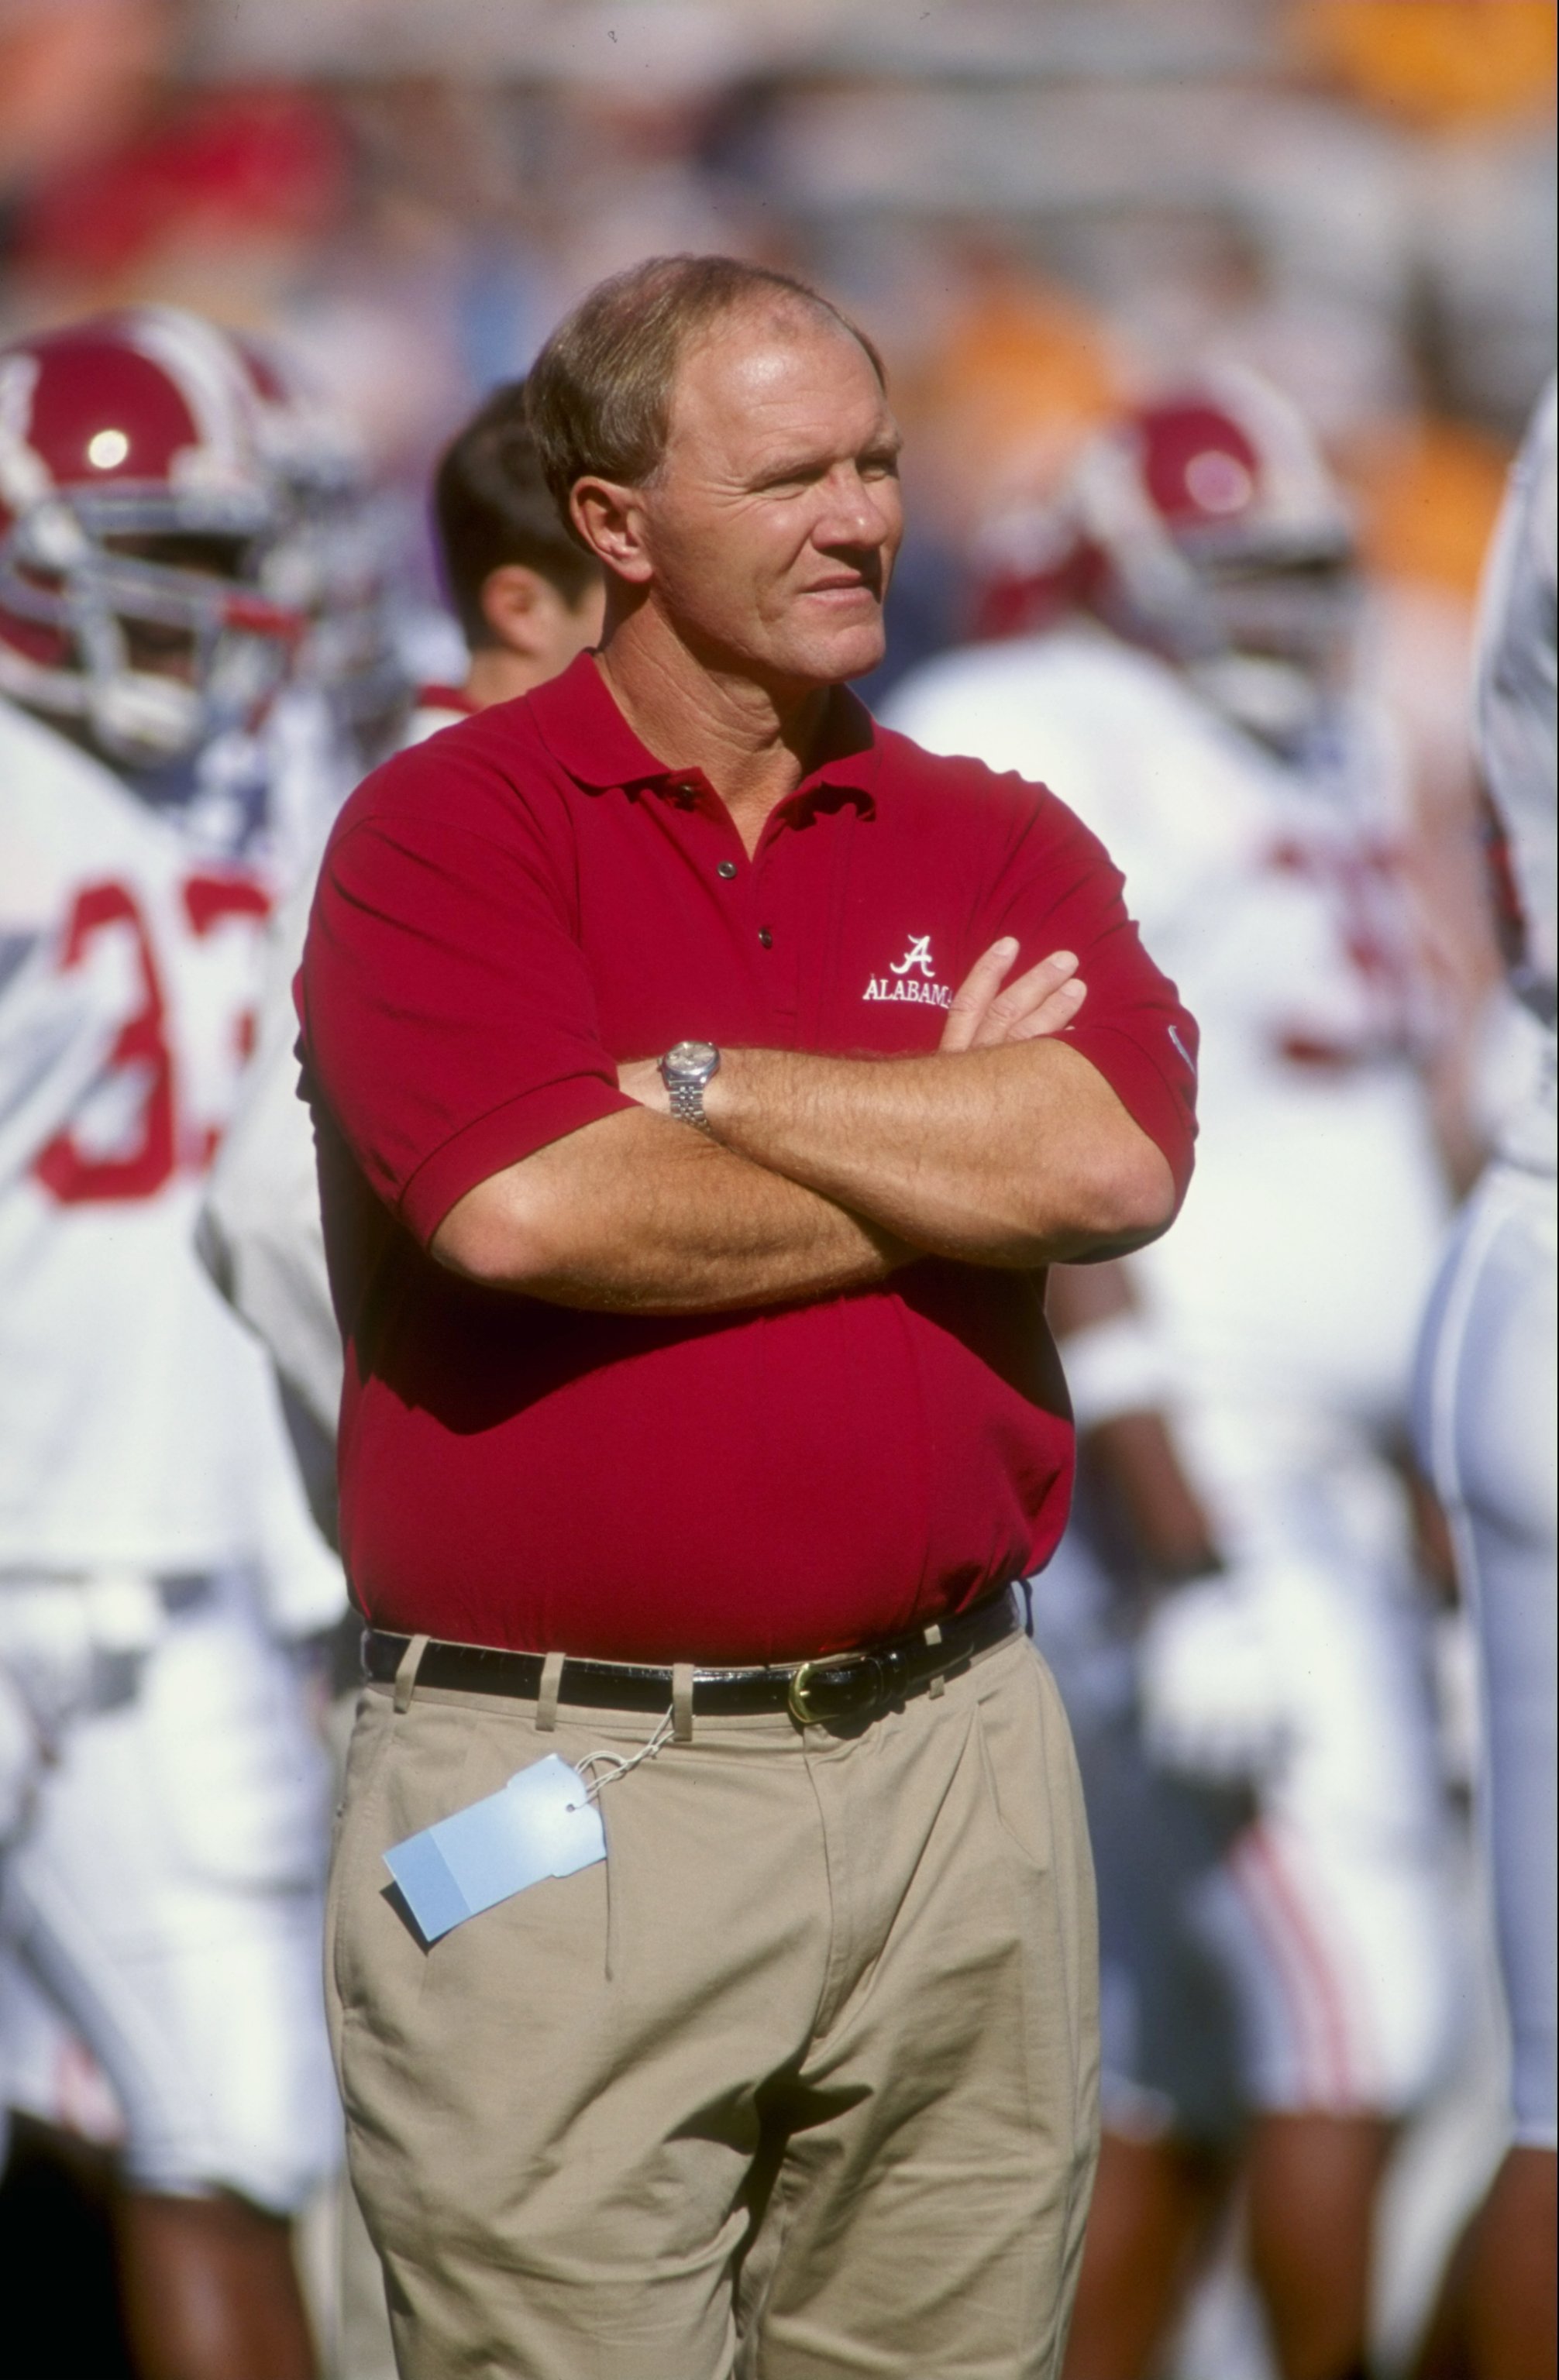 24 Oct 1998: Head coach Mike Dubose of the Alabama Crimson Tide watches the field during the game against the Tennessee Volunteers at Neyland Stadium in Knoxville Tennessee. Tennessee defeated Alabama 35-18. Mandatory Credit: Scott Halleran  /Allsport